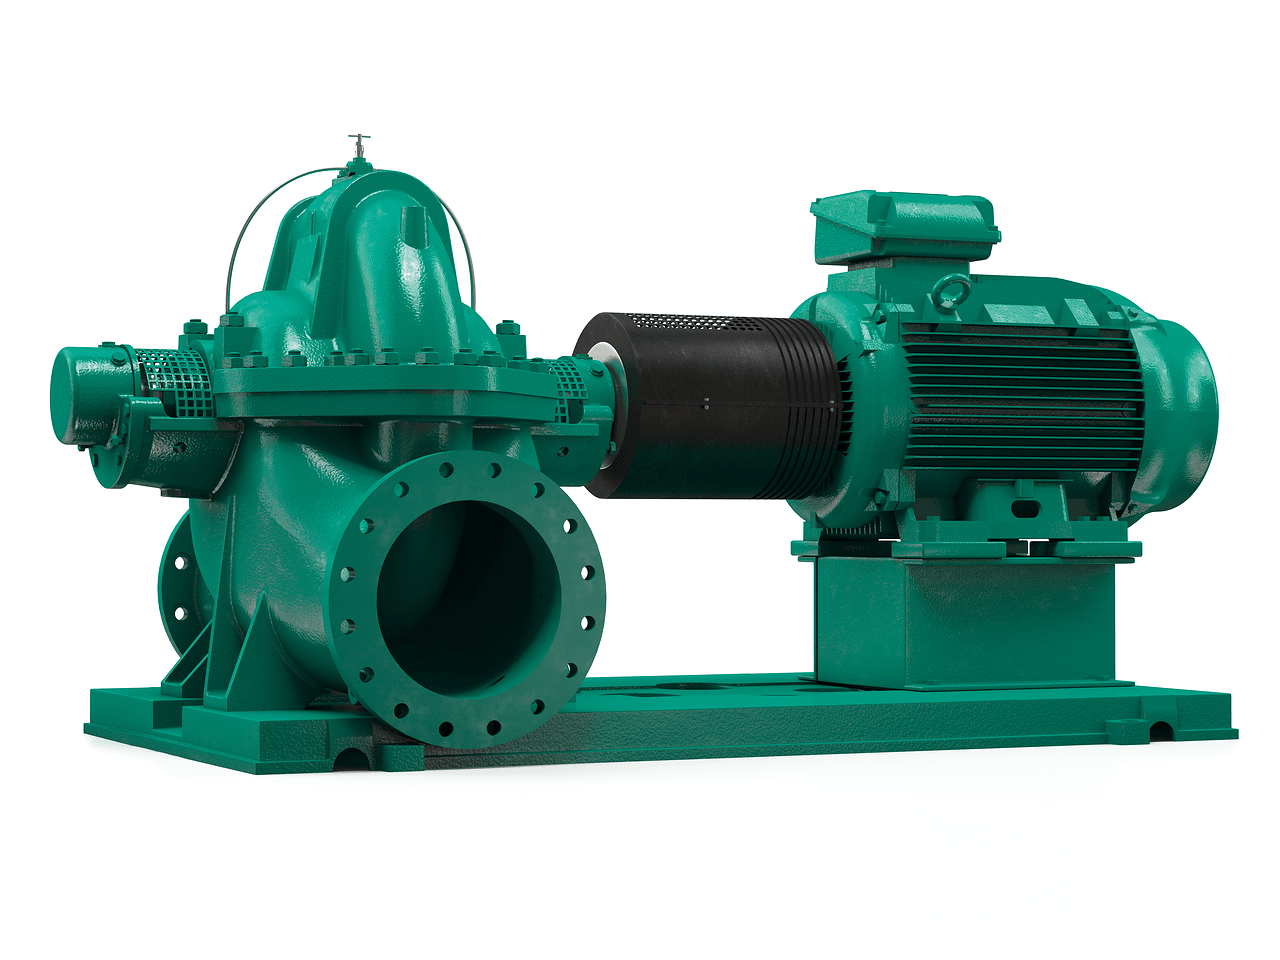 Industrial Pumps: Essential Equipment for Fluid Management in Industry